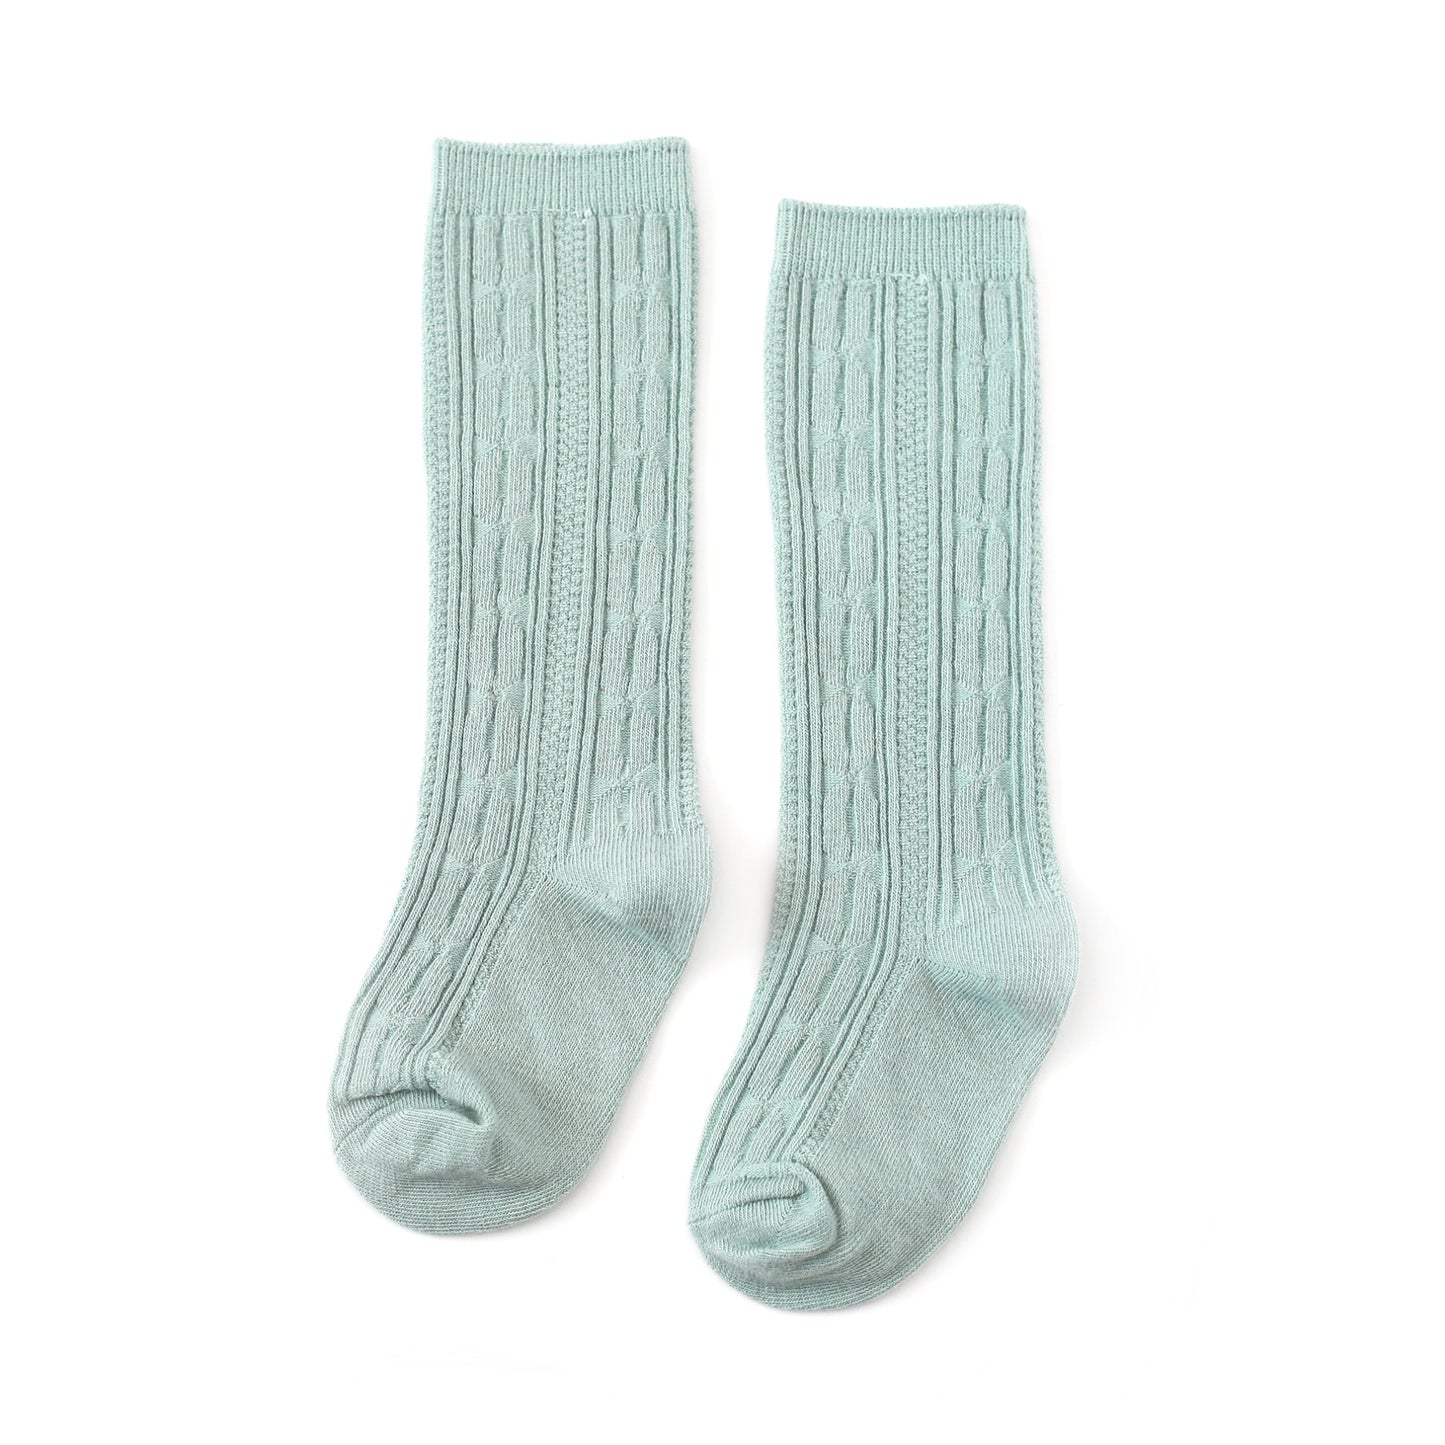 Cable Knit Knee High Socks - Garden Party Collection - Little Stocking Co